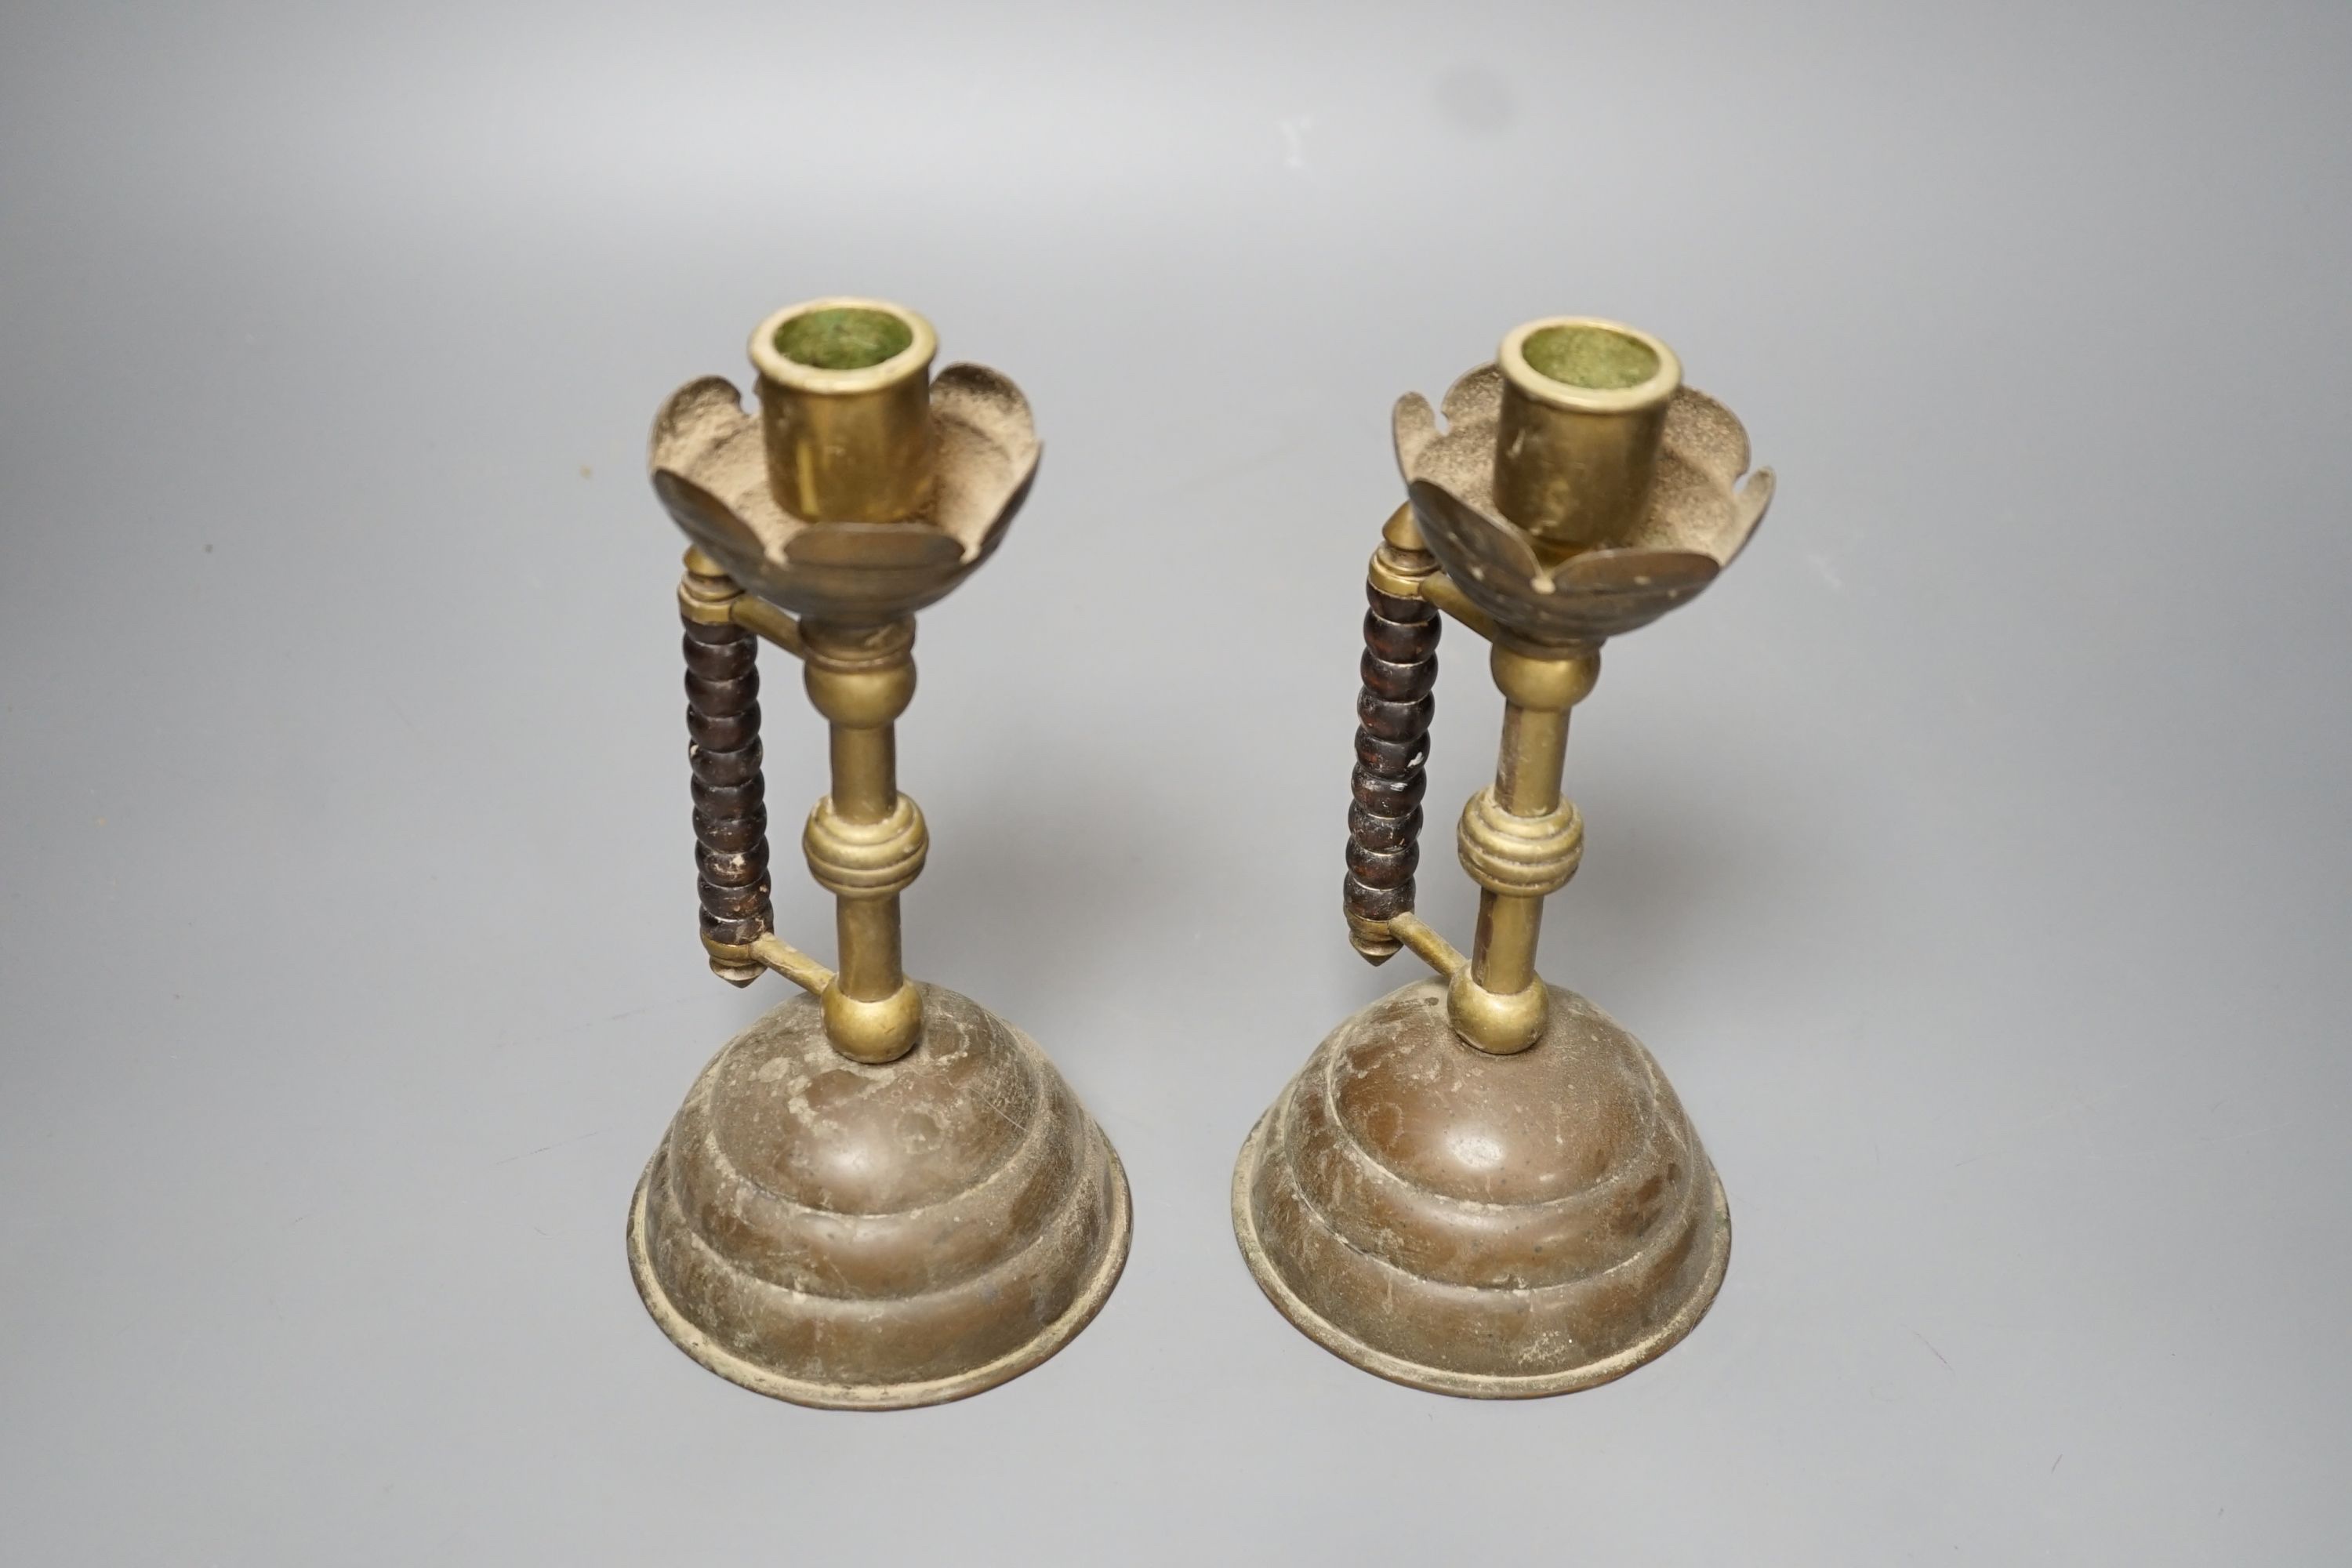 A pair of Gothic brass stem cup and handled candlesticks - 19.5cm high - Image 3 of 3